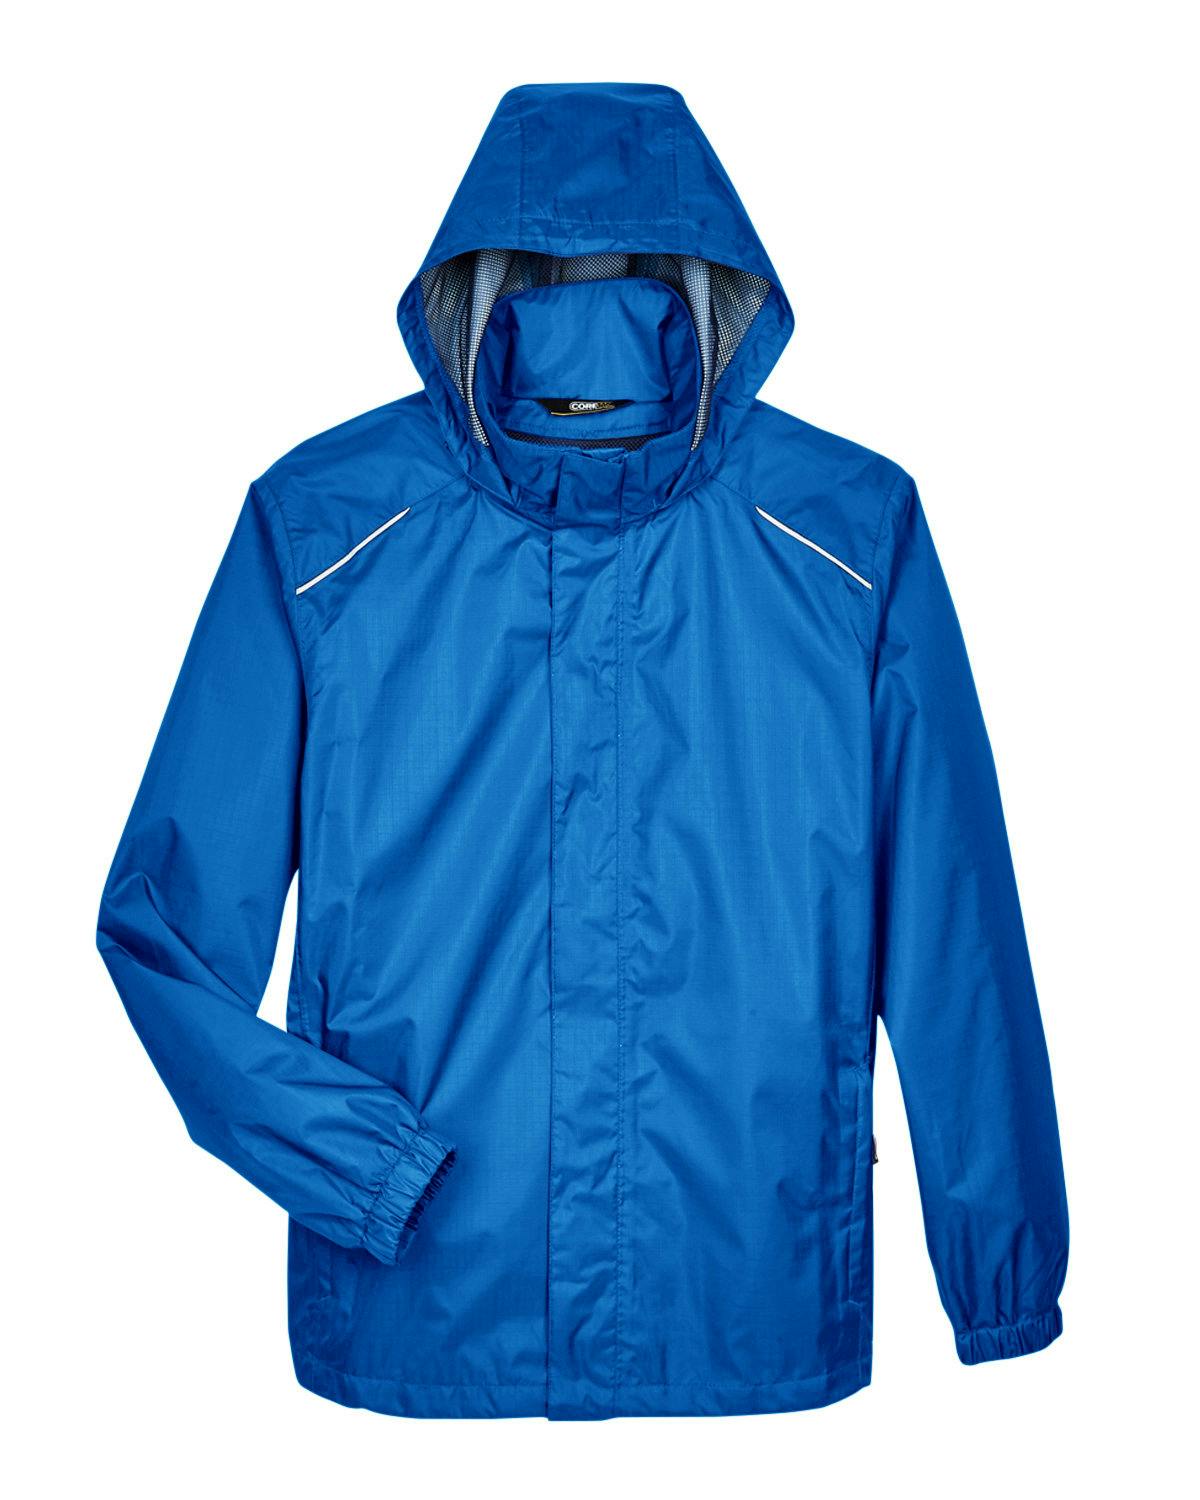 Image for Men's Climate Seam-Sealed Lightweight Variegated Ripstop Jacket